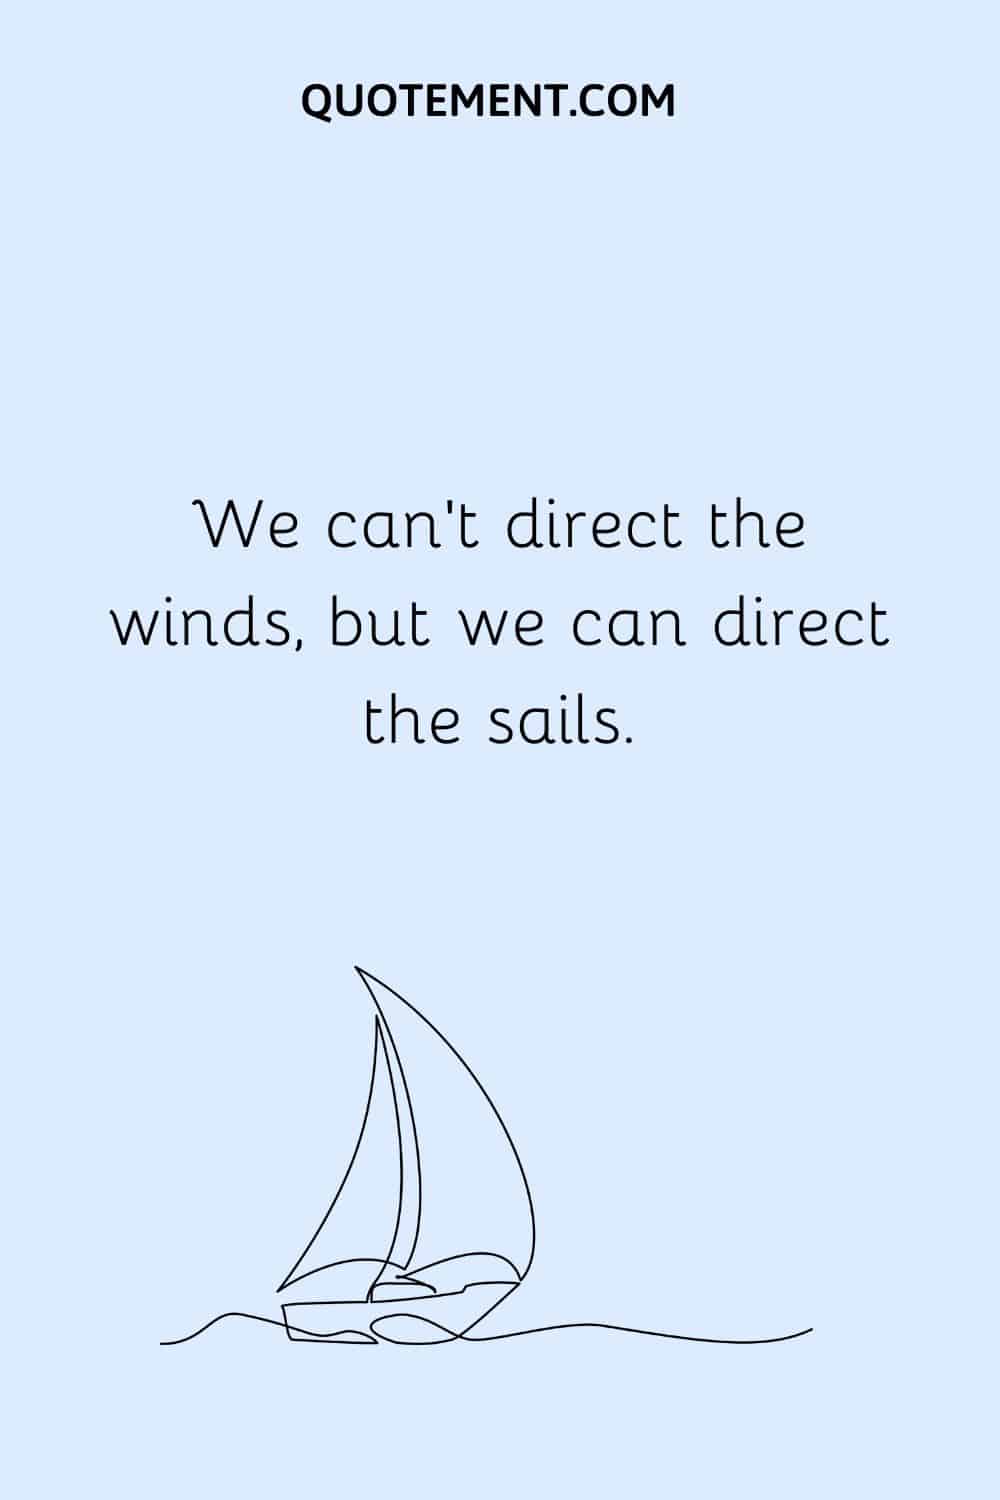 We can't direct the winds, but we can direct the sails